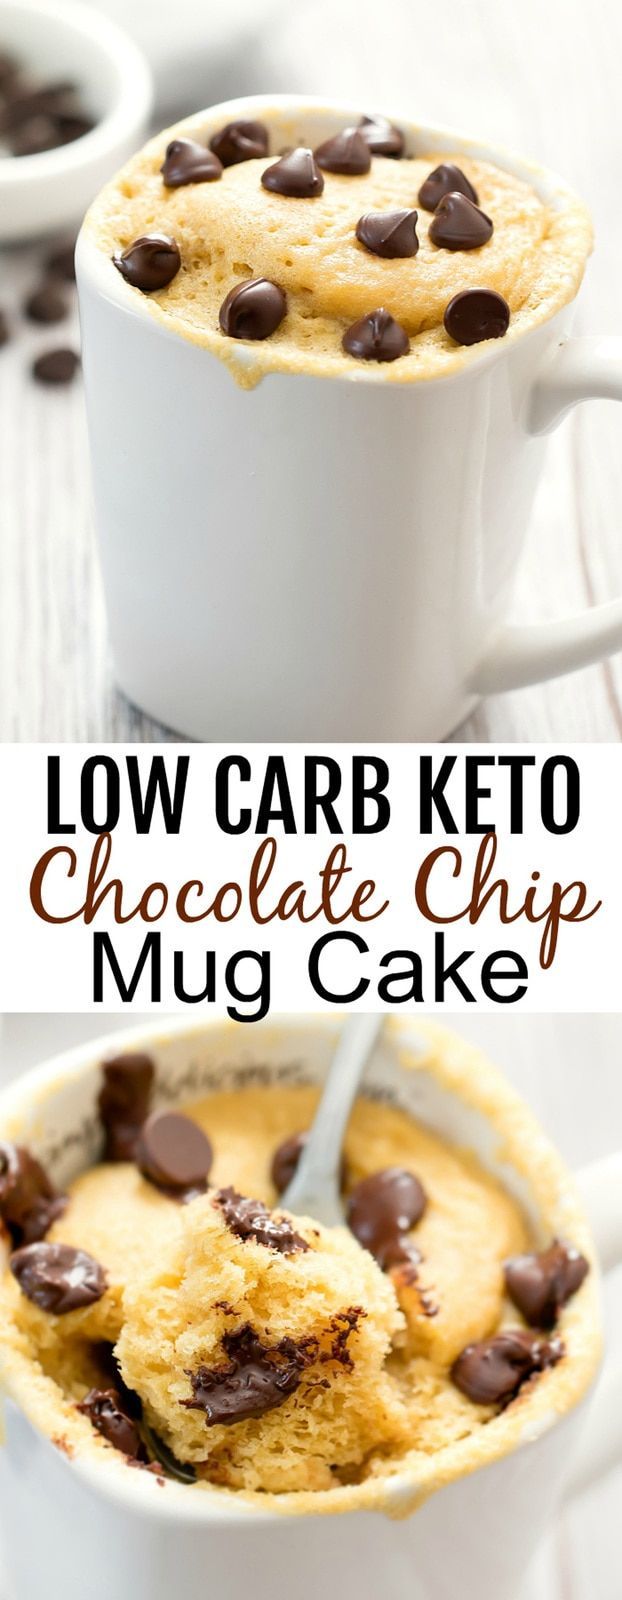 9 cake For Kids low carb ideas